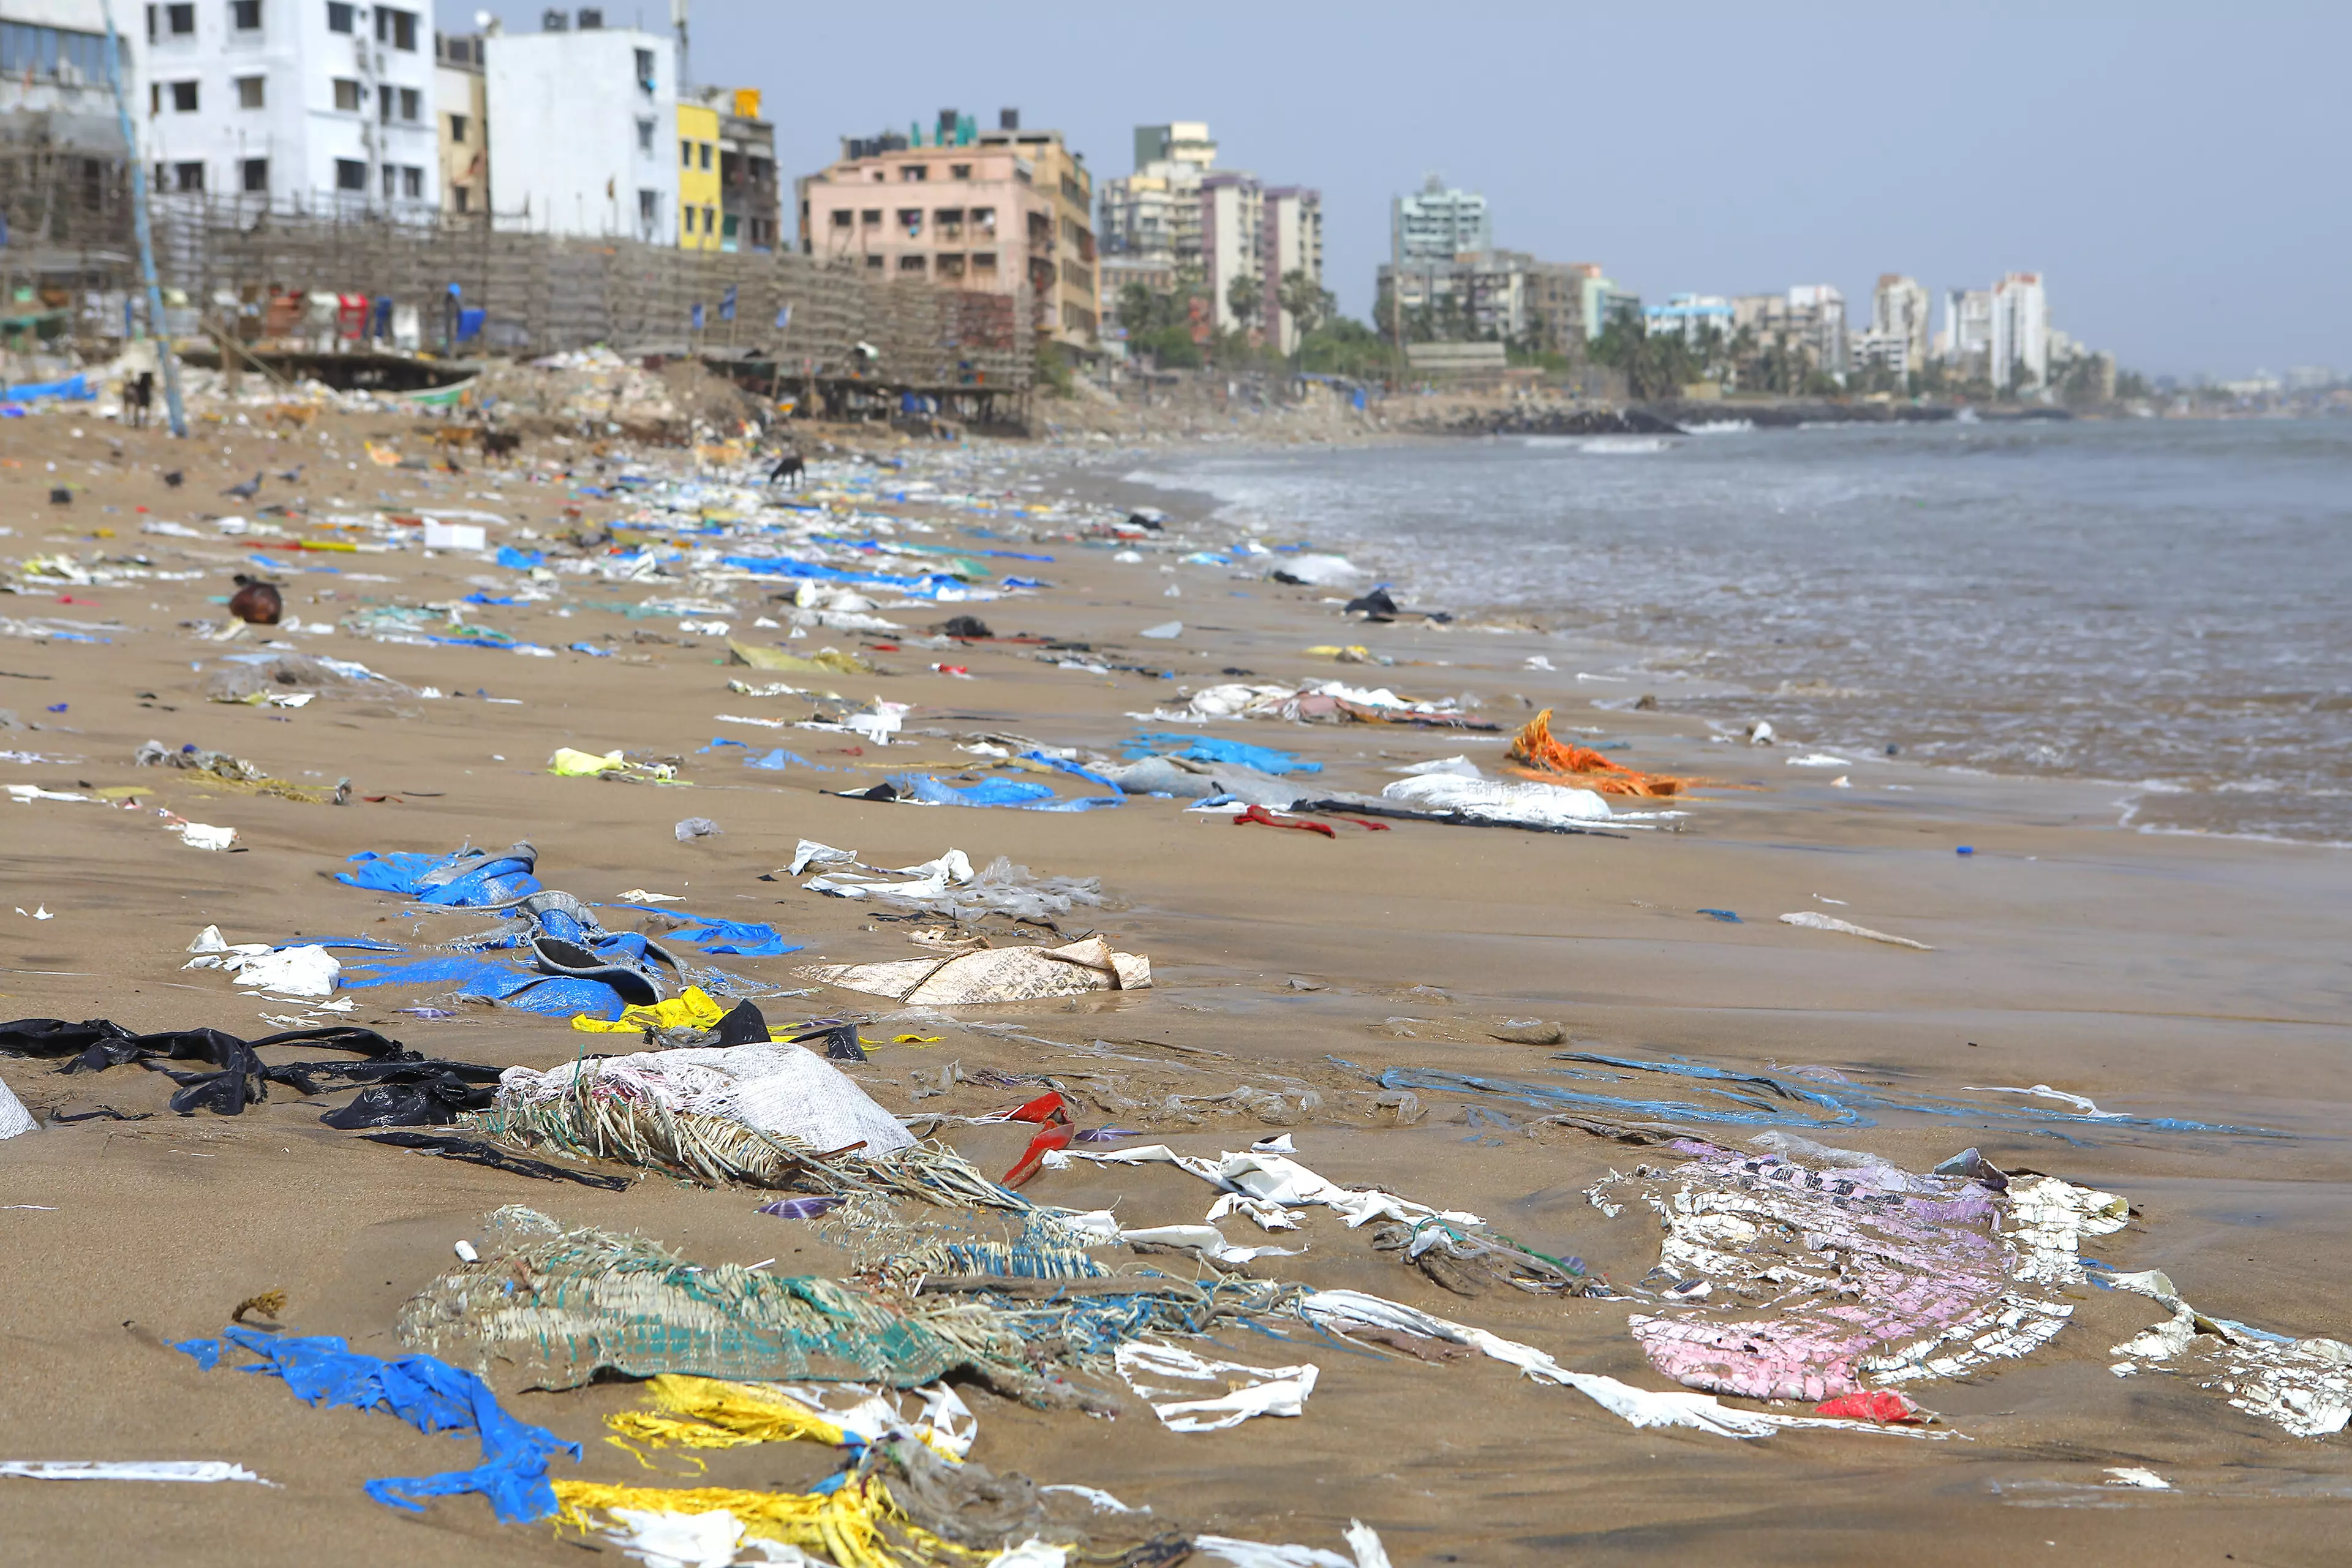 Plastic bags are damaging to the environment (